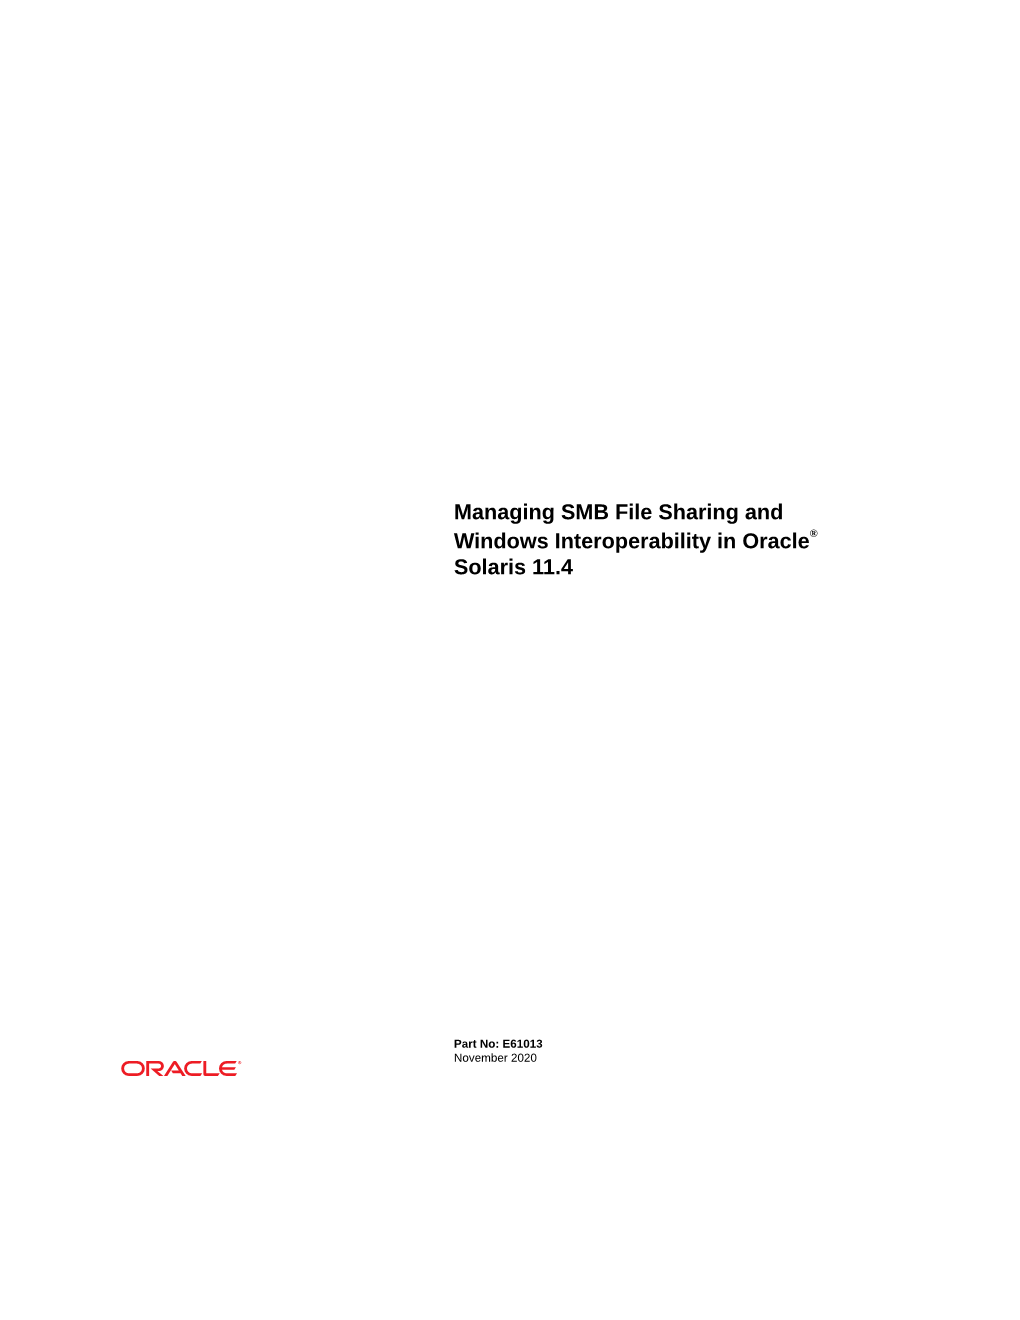 Managing SMB File Sharing and Windows Interoperability in Oracle® Solaris 11.4